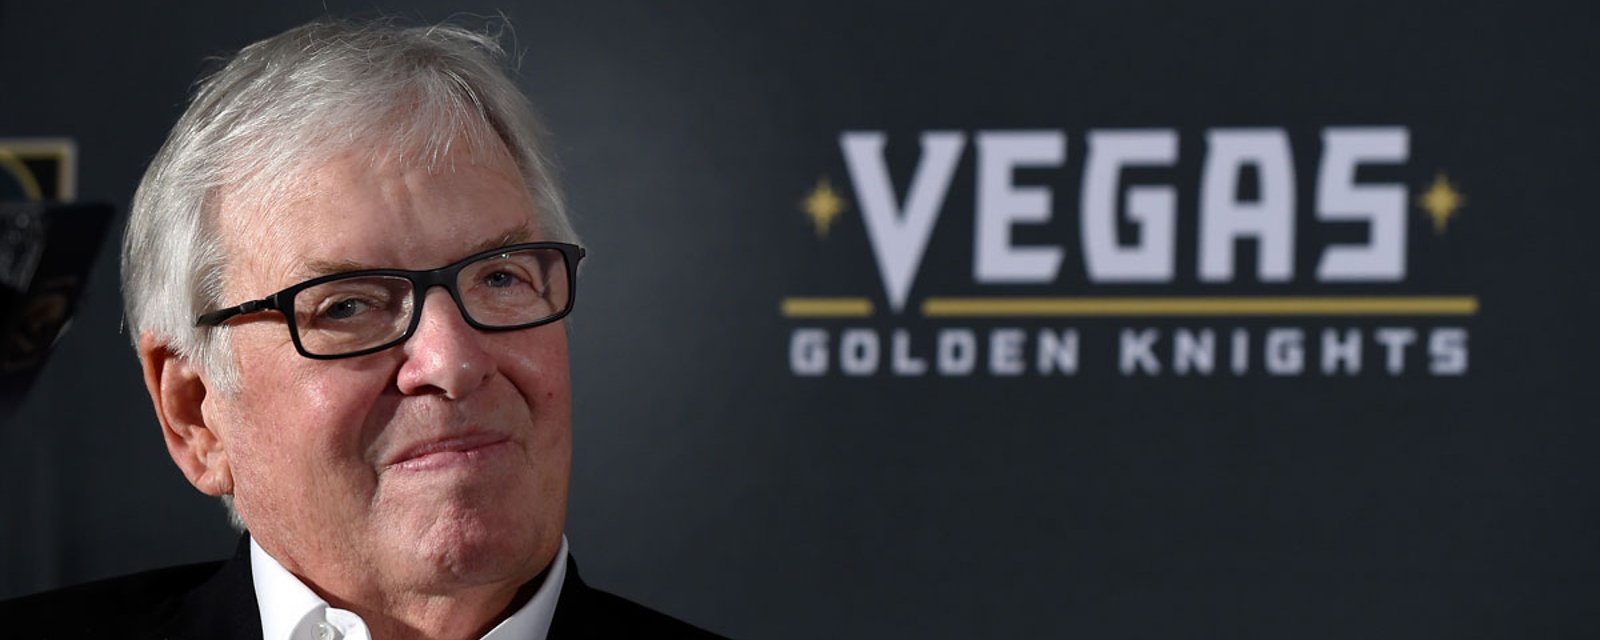 Golden Knights owner Bill Foley makes a bold prediction!